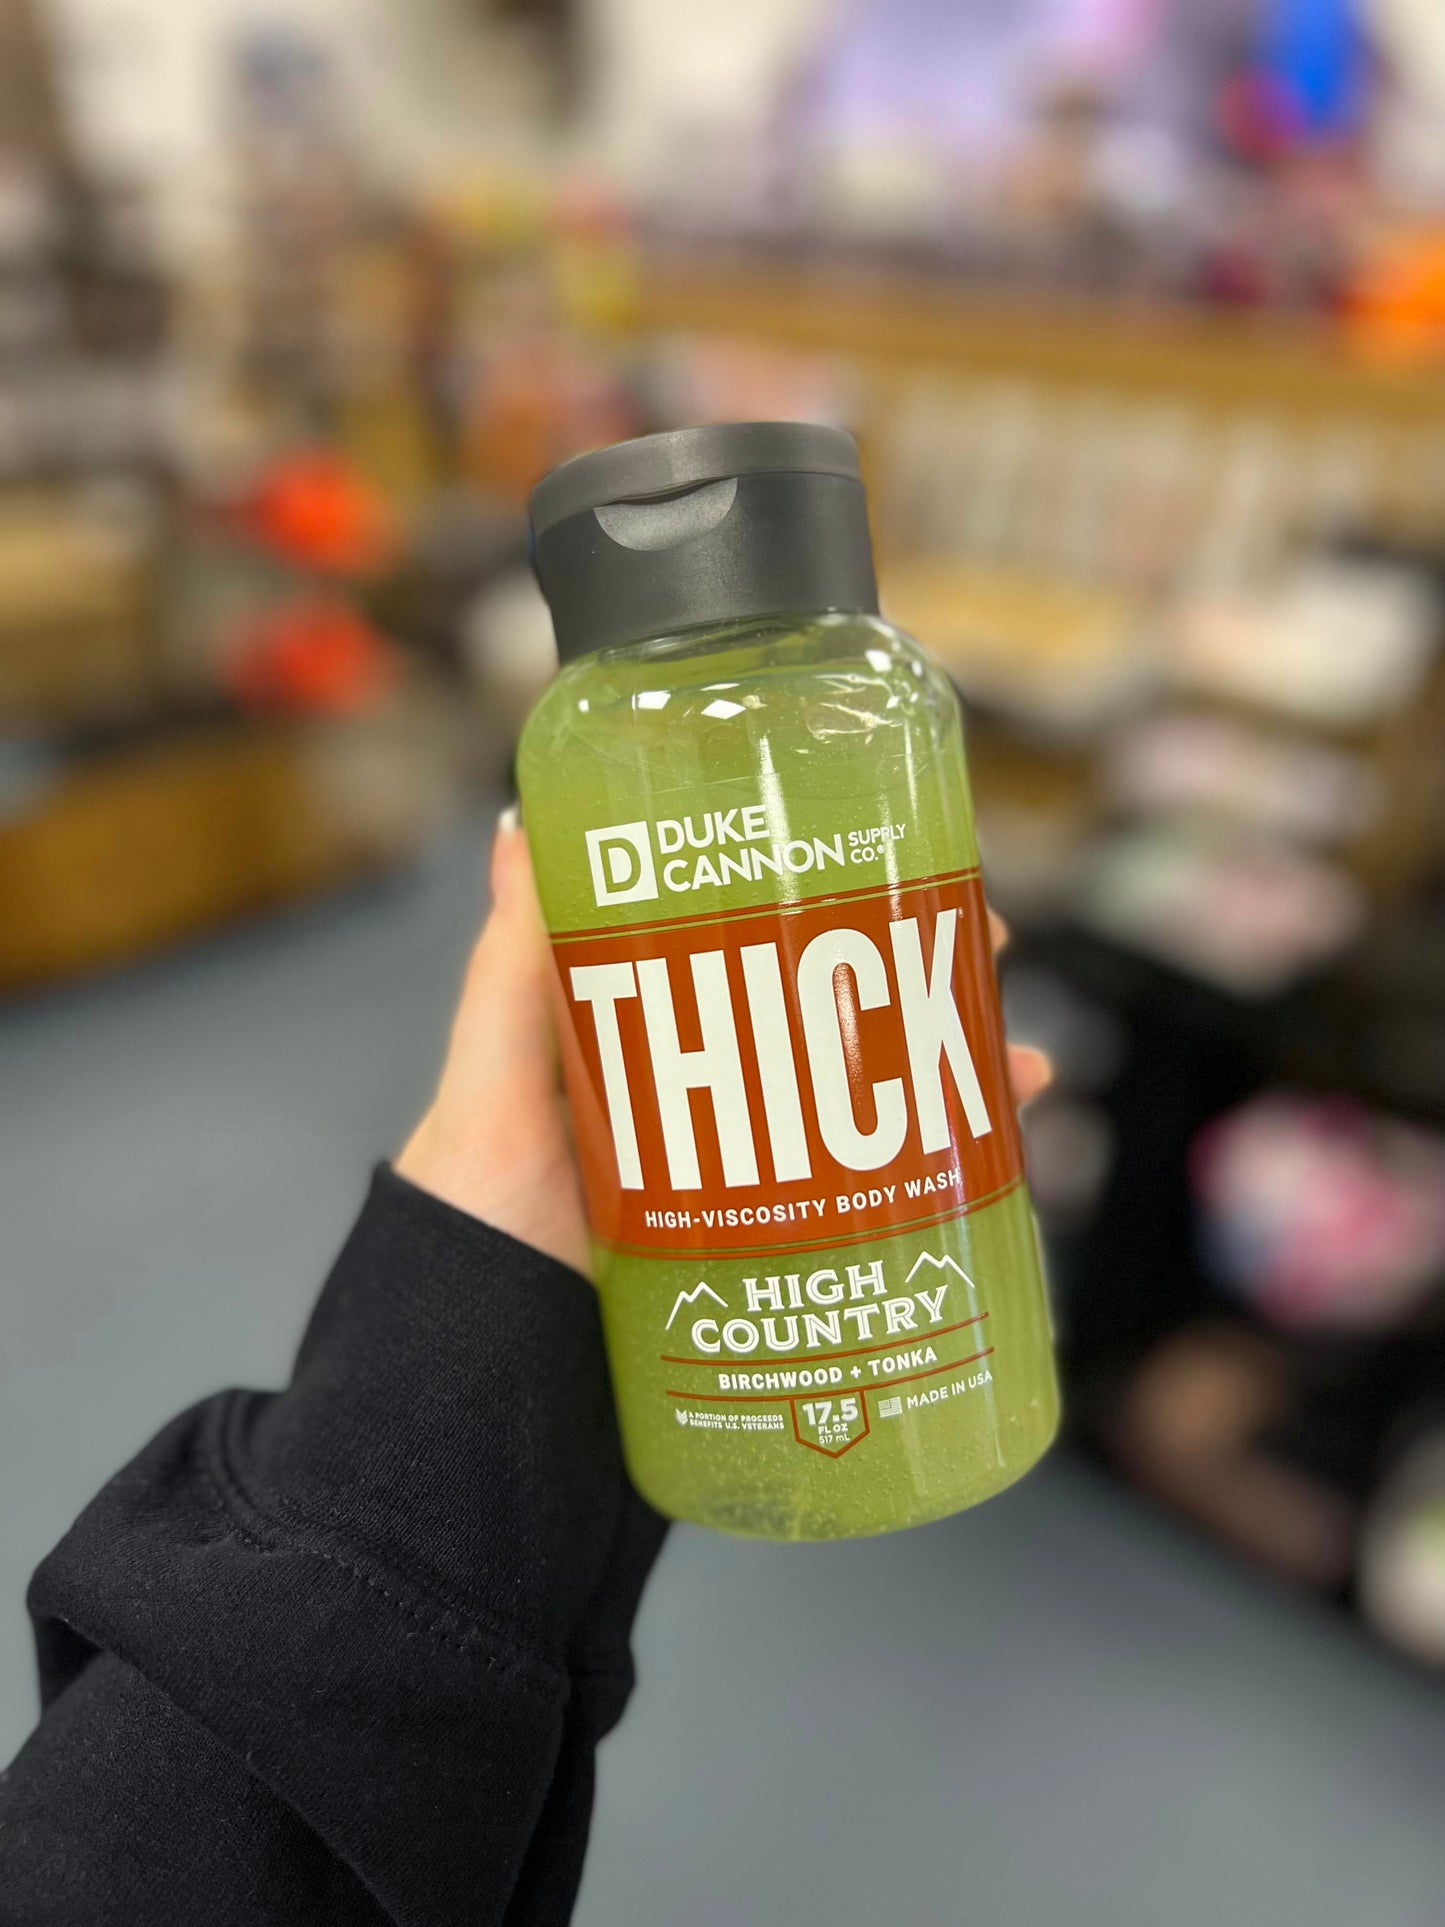 Thick High Viscosity Body Wash, High Country